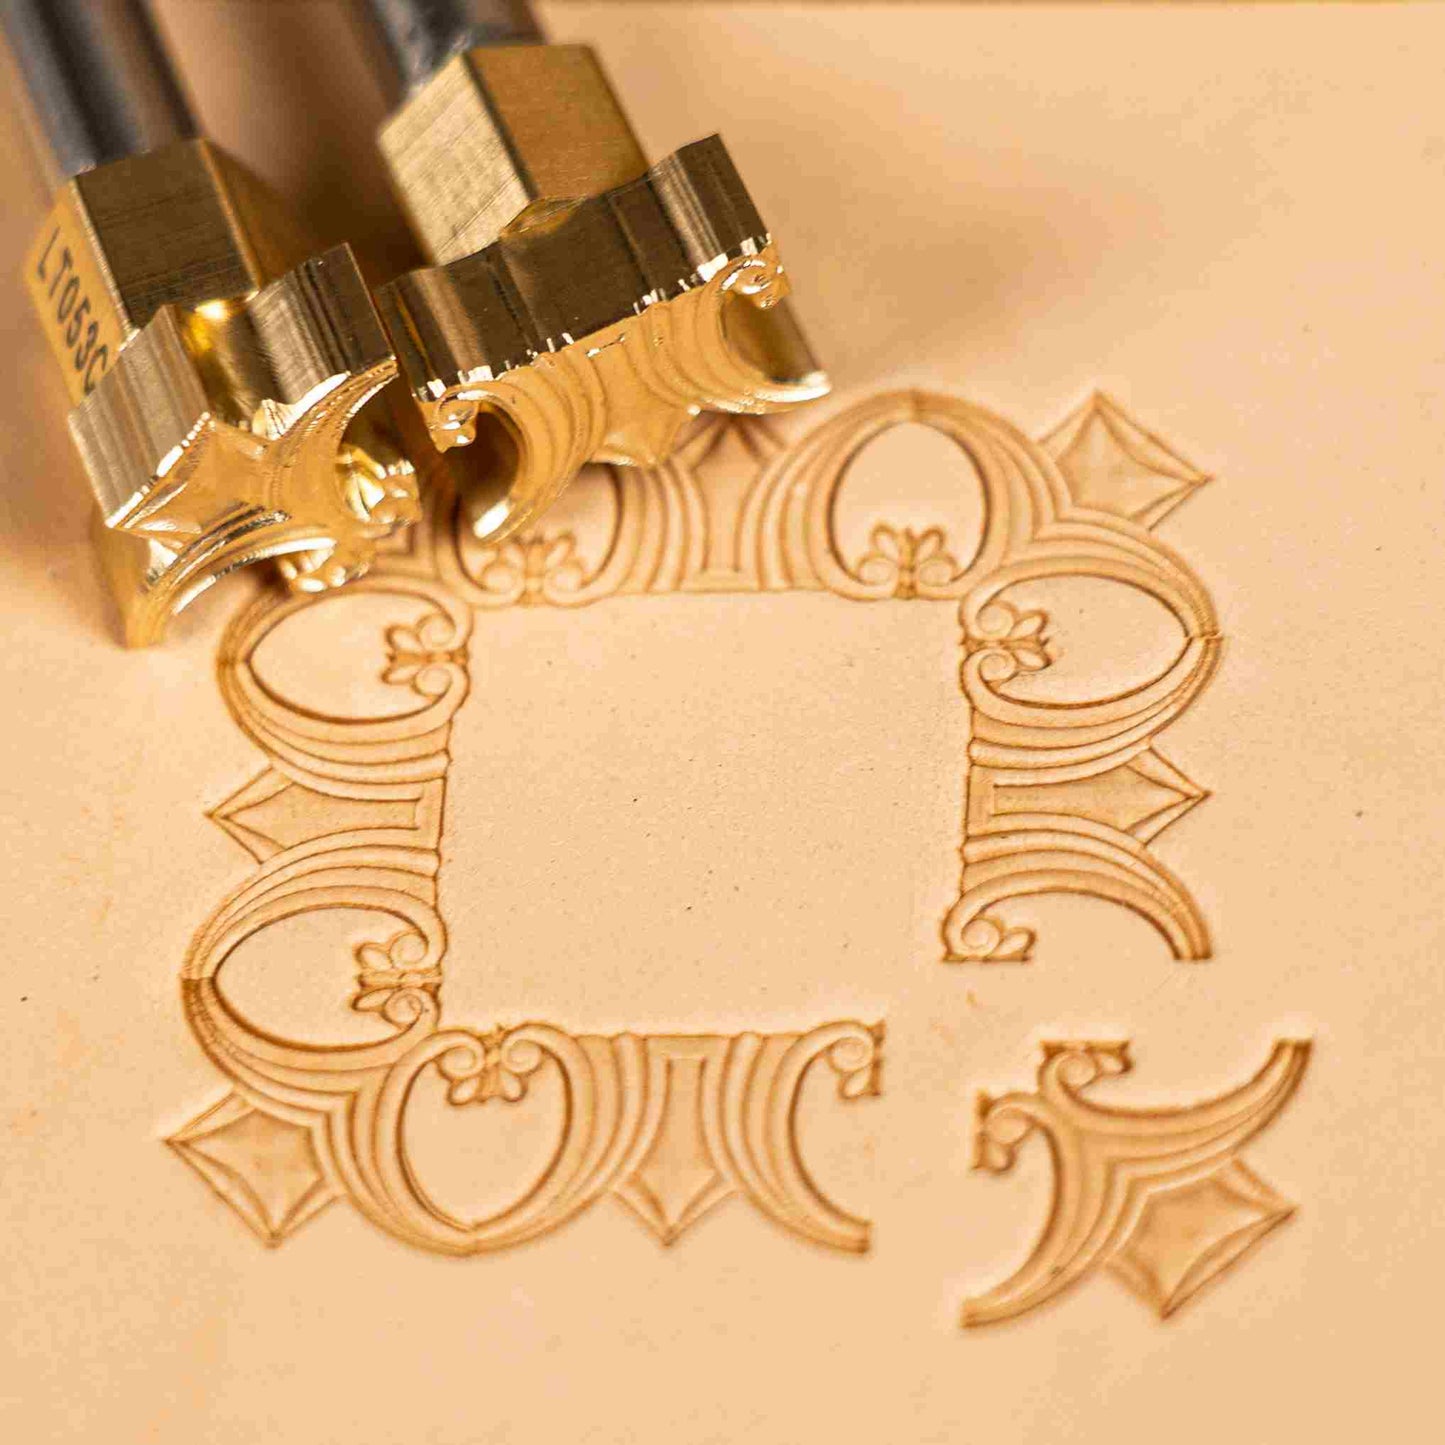 LT053 Border and Corner Premium Leather Stamping Tools for Professional Crafters-17x12mm size